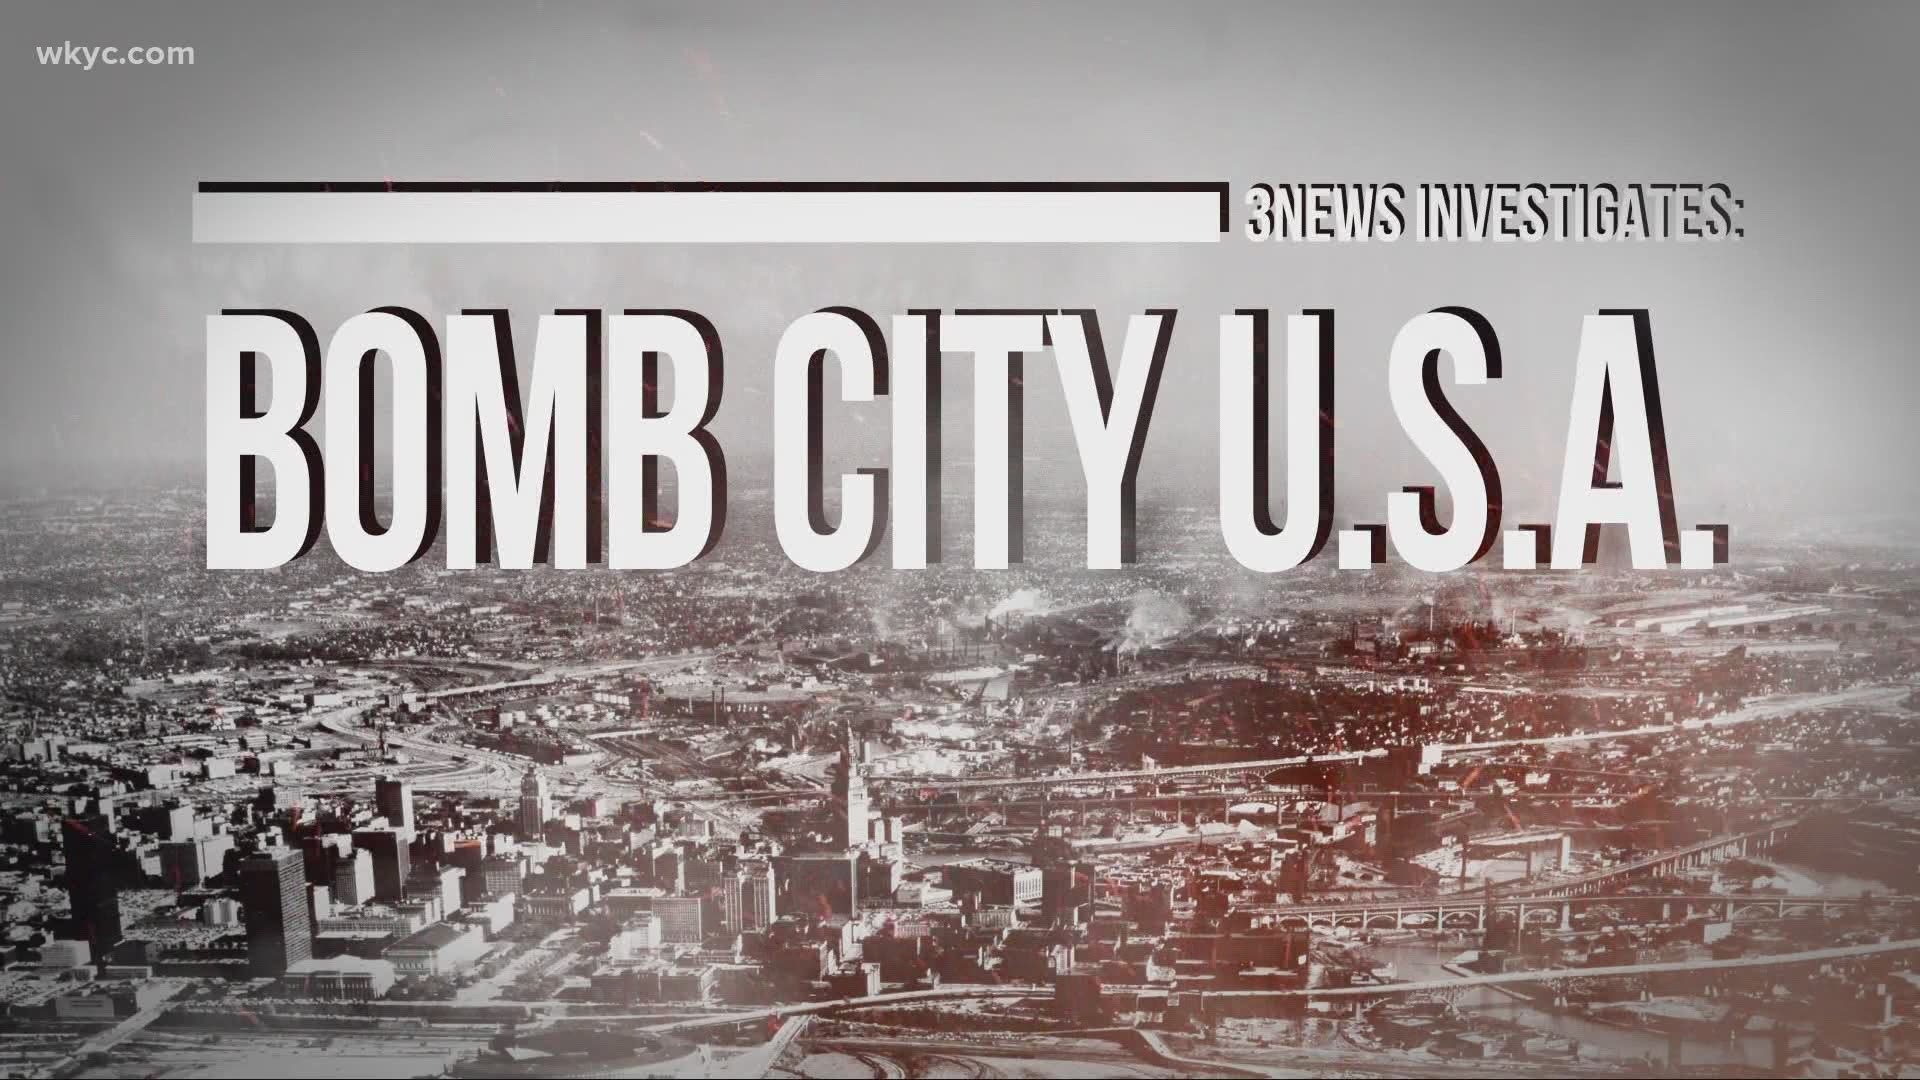 Bomb City U.S.A. is a true story about organized crime, murder and a fight for control - that left everyone dead or behind bars.